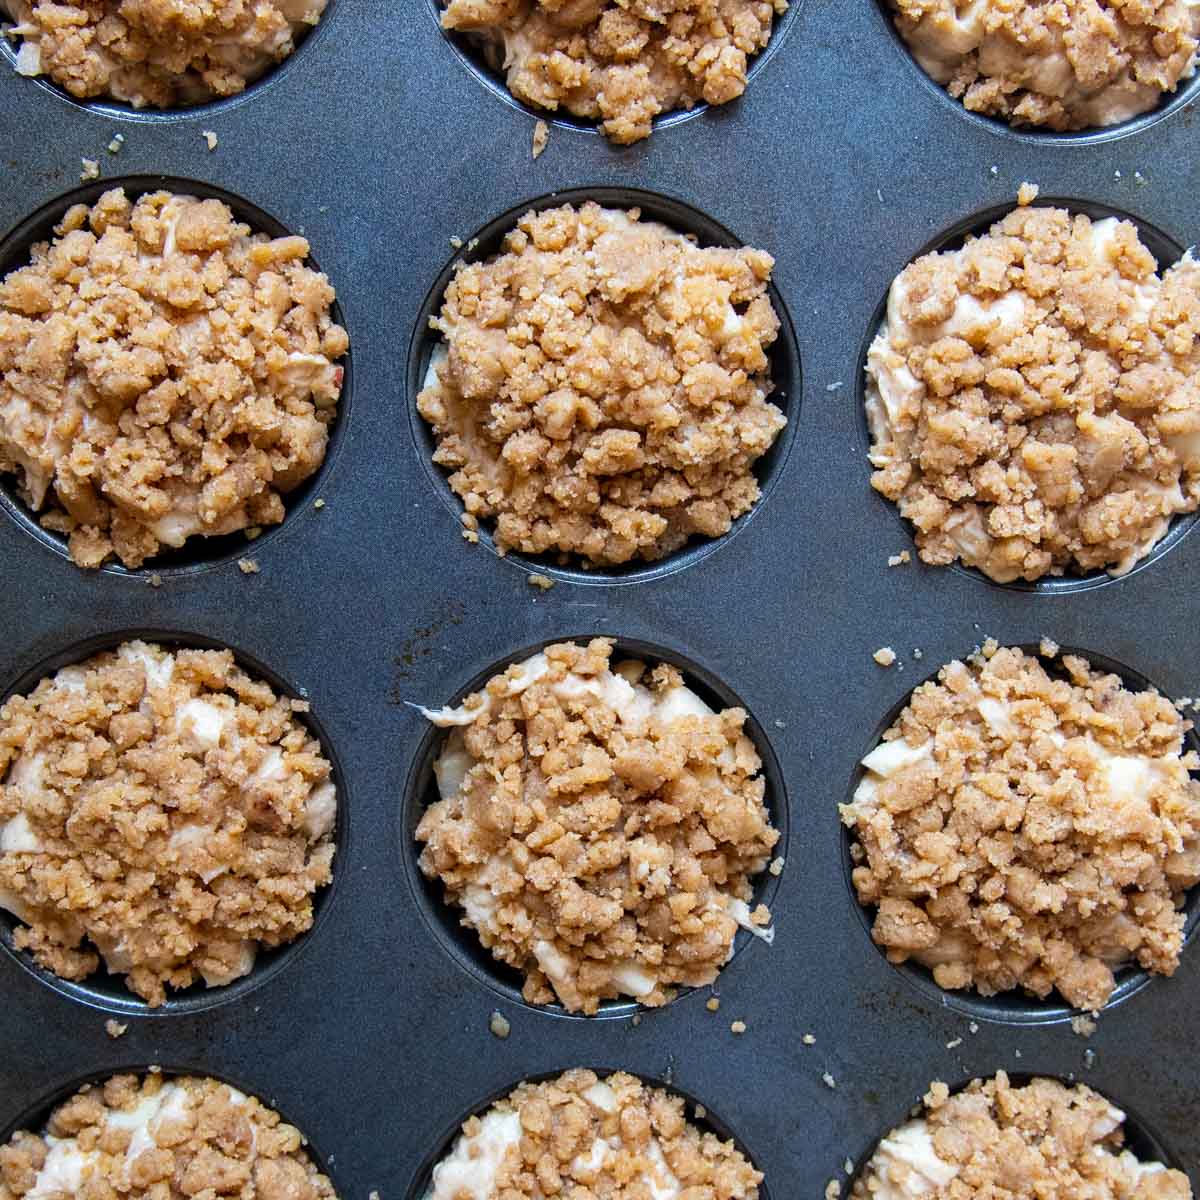 unbaked gluten-free apple muffins with streusel on top